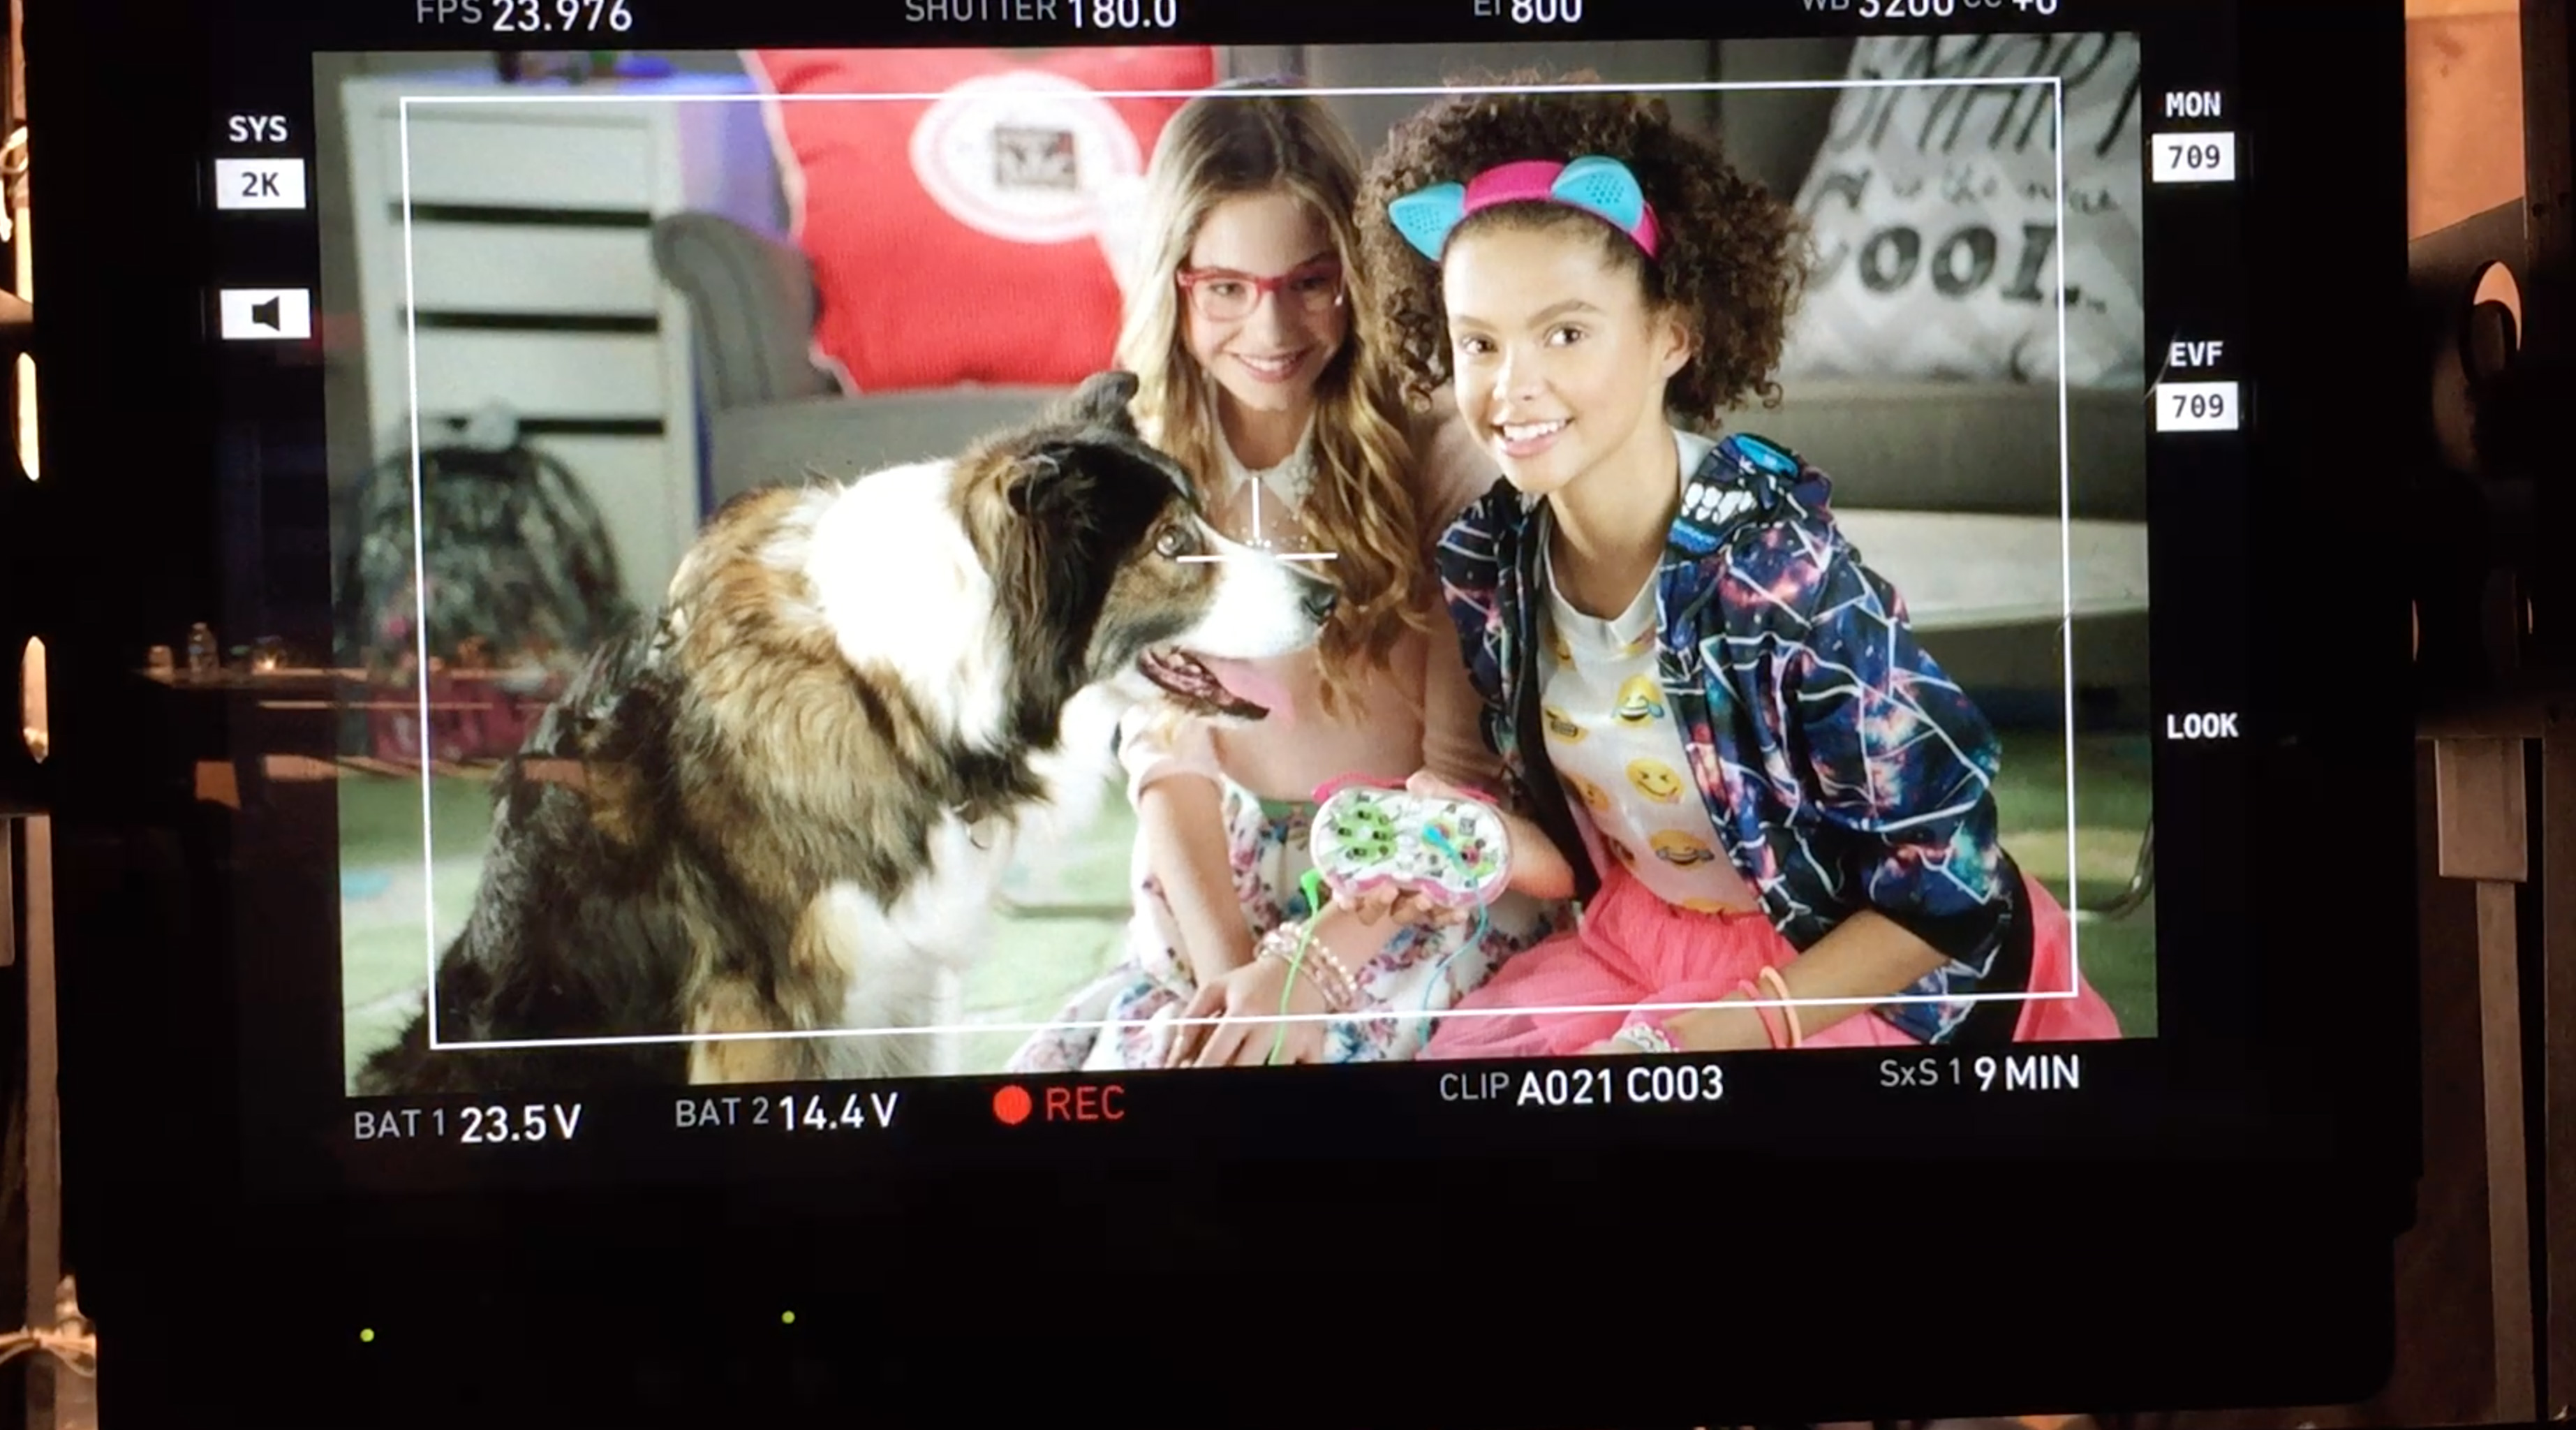 On set of the Project MC2 Commercial